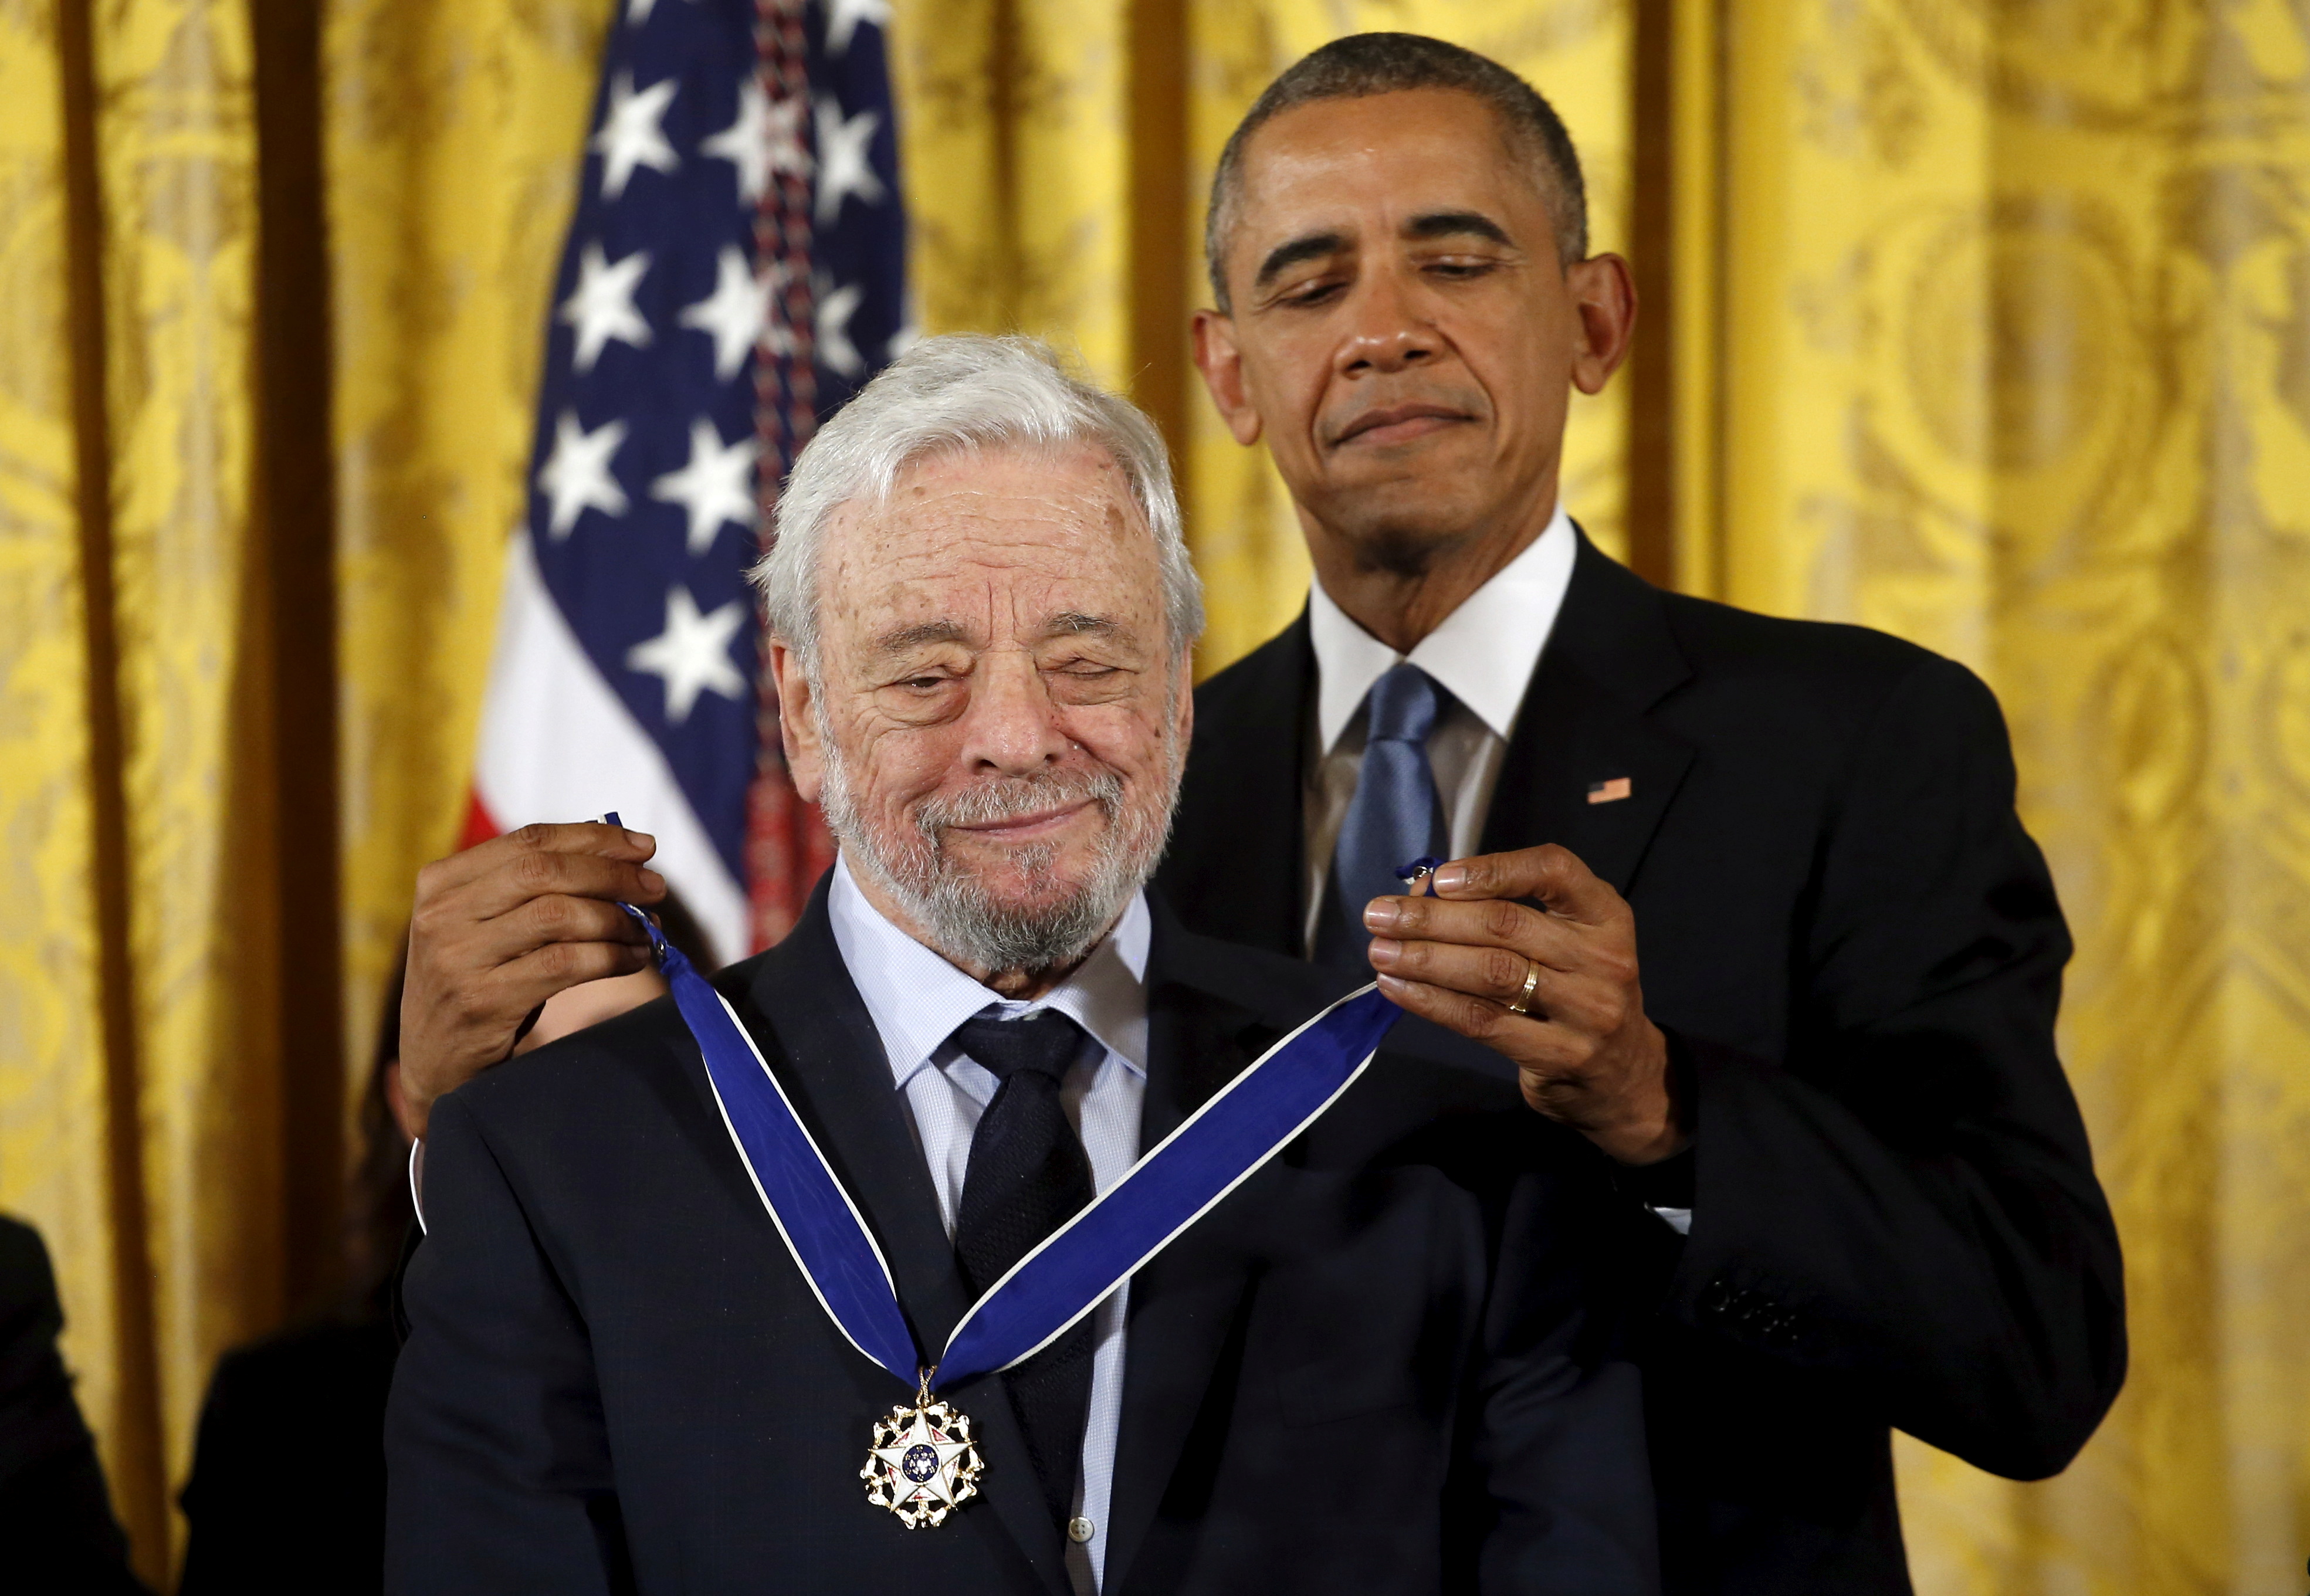 U.S. President Barack Obama presents the Presidential Medal of Freedom to composer and lyricists Stephen Sondheim during an event in the East Room of the White House in Washington November 24, 2015. REUTERS/Carlos Barria